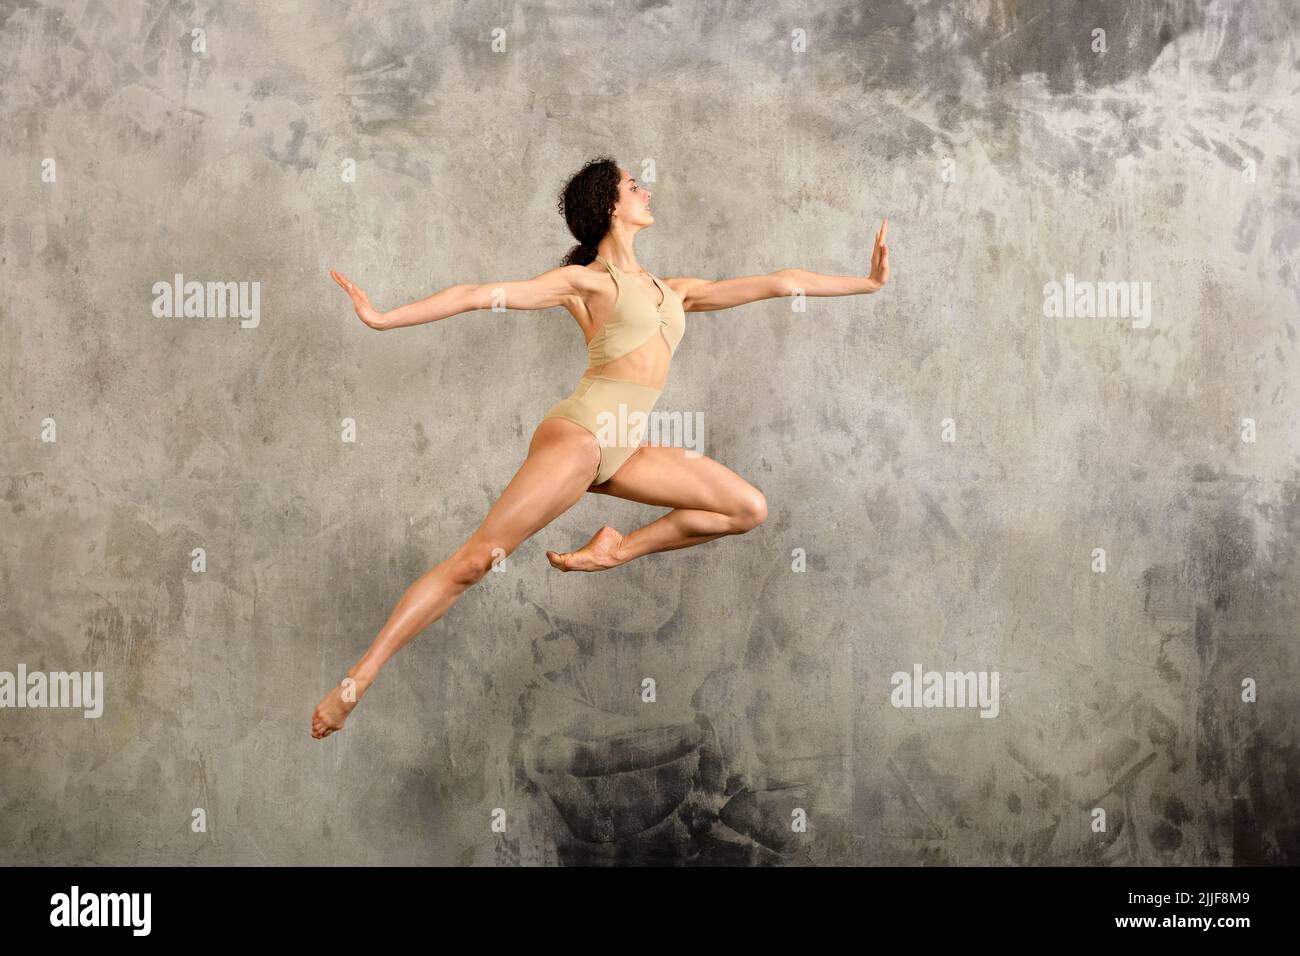 Full body side view of female ballet dancer in bodysuit leaping up with spread arms against gray wall in studio Stock Photo